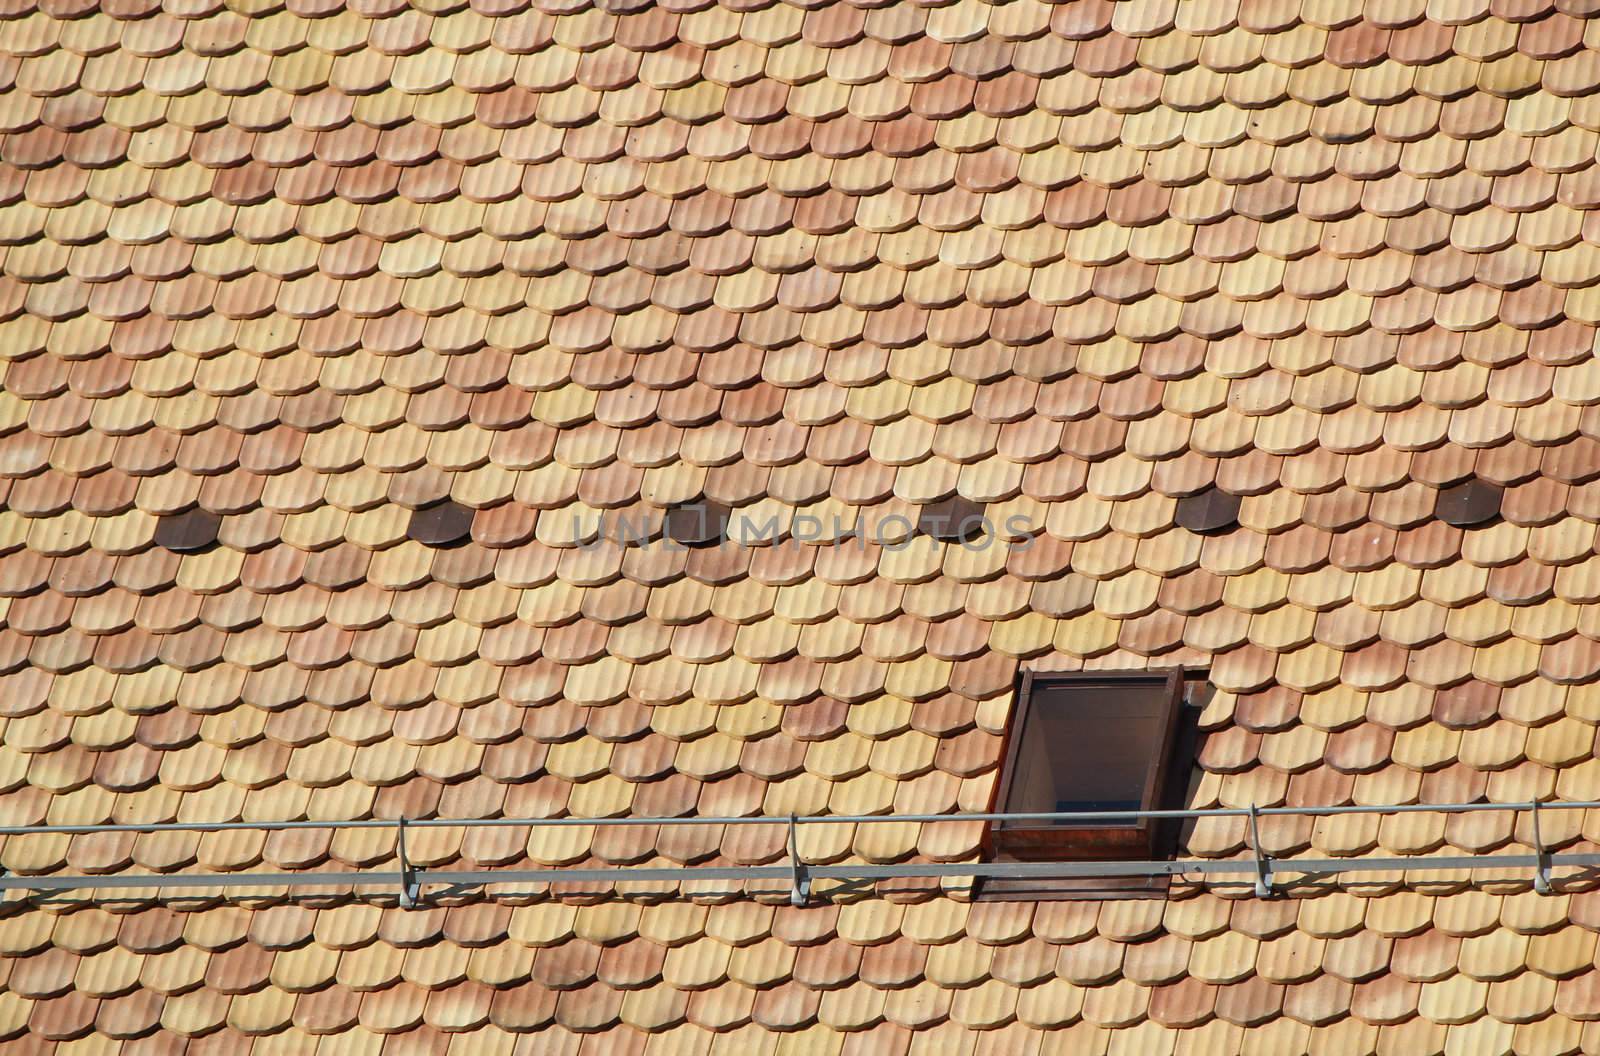 Roof tiles by Elenaphotos21